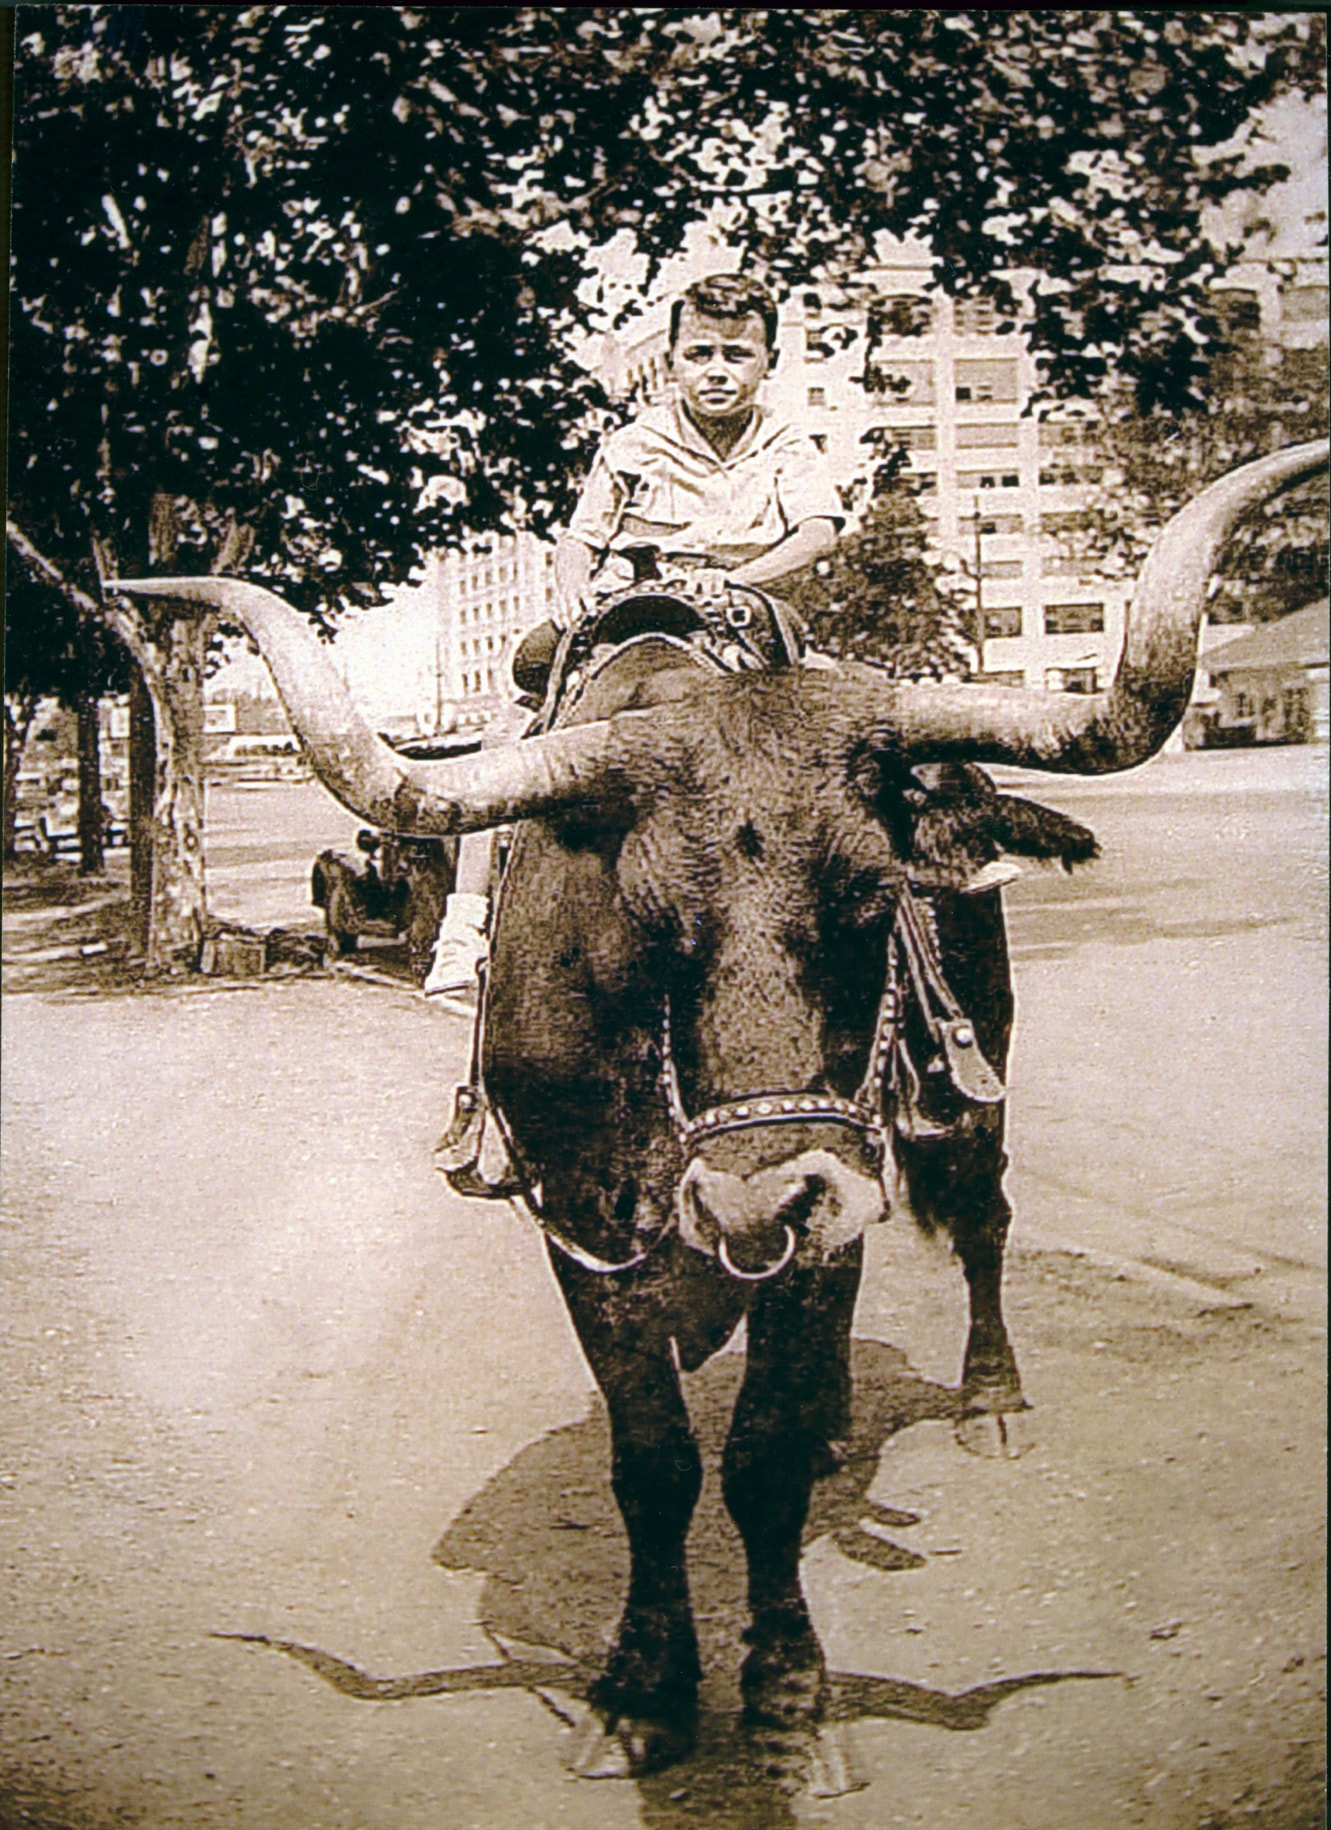 Robert Indiana, age seven, on the back of a longhorn steer at the Frontier Centennial Exposition, Fort Worth, Texas, 1936